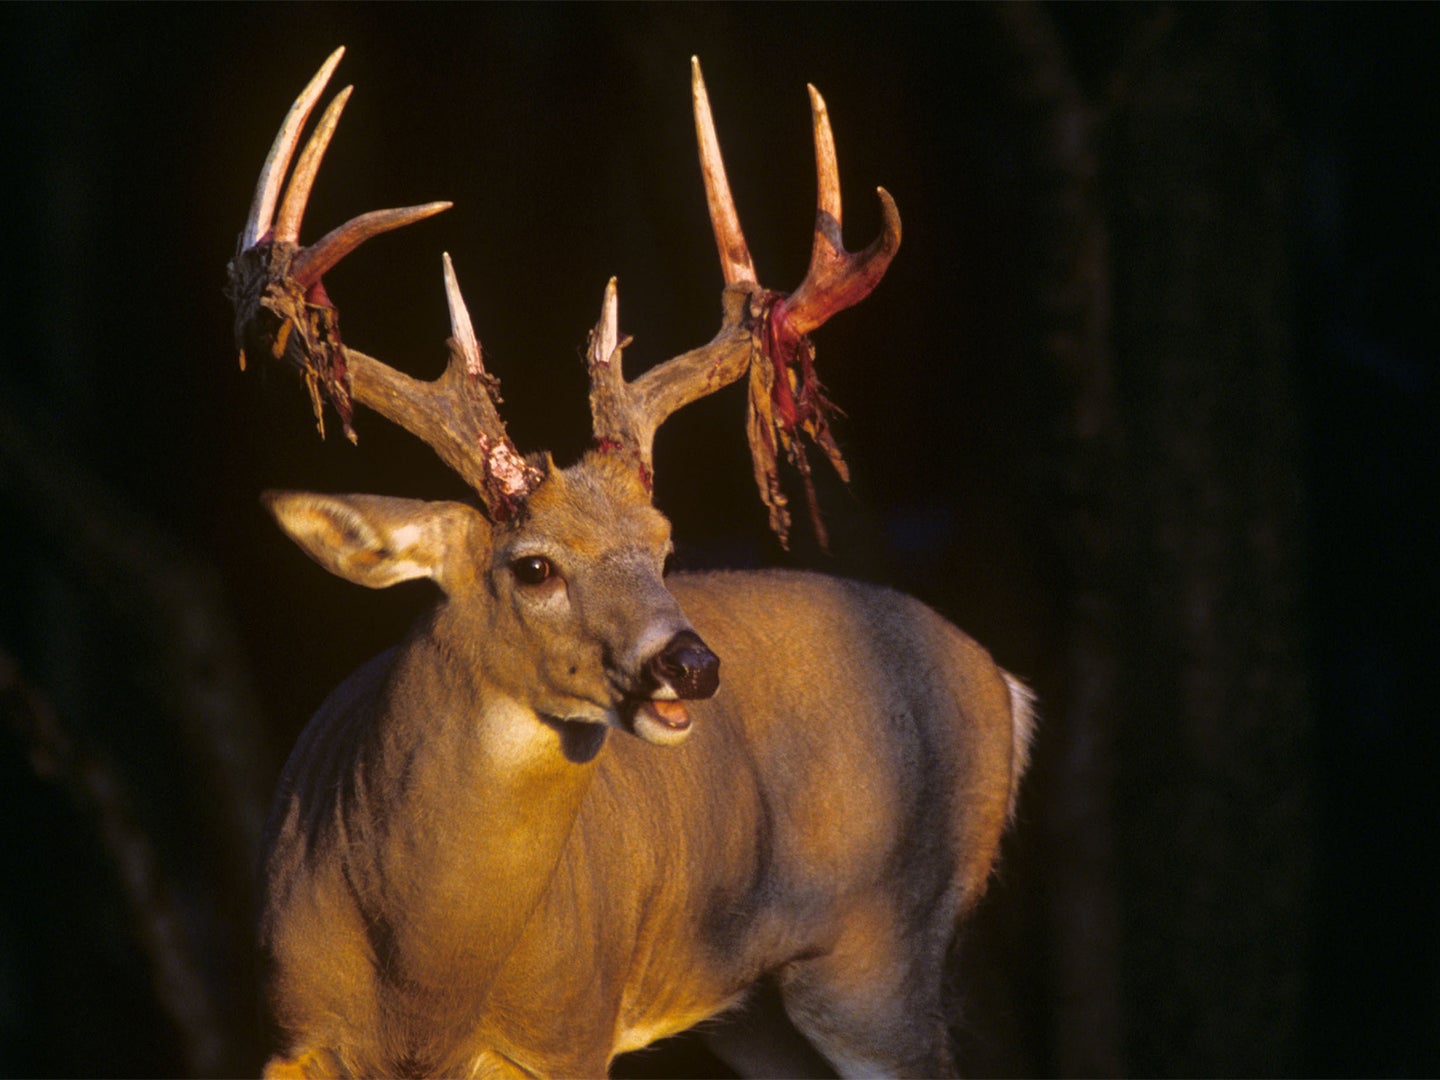 A large whitetail deer in the shadows while it sheds its velvet antlers.